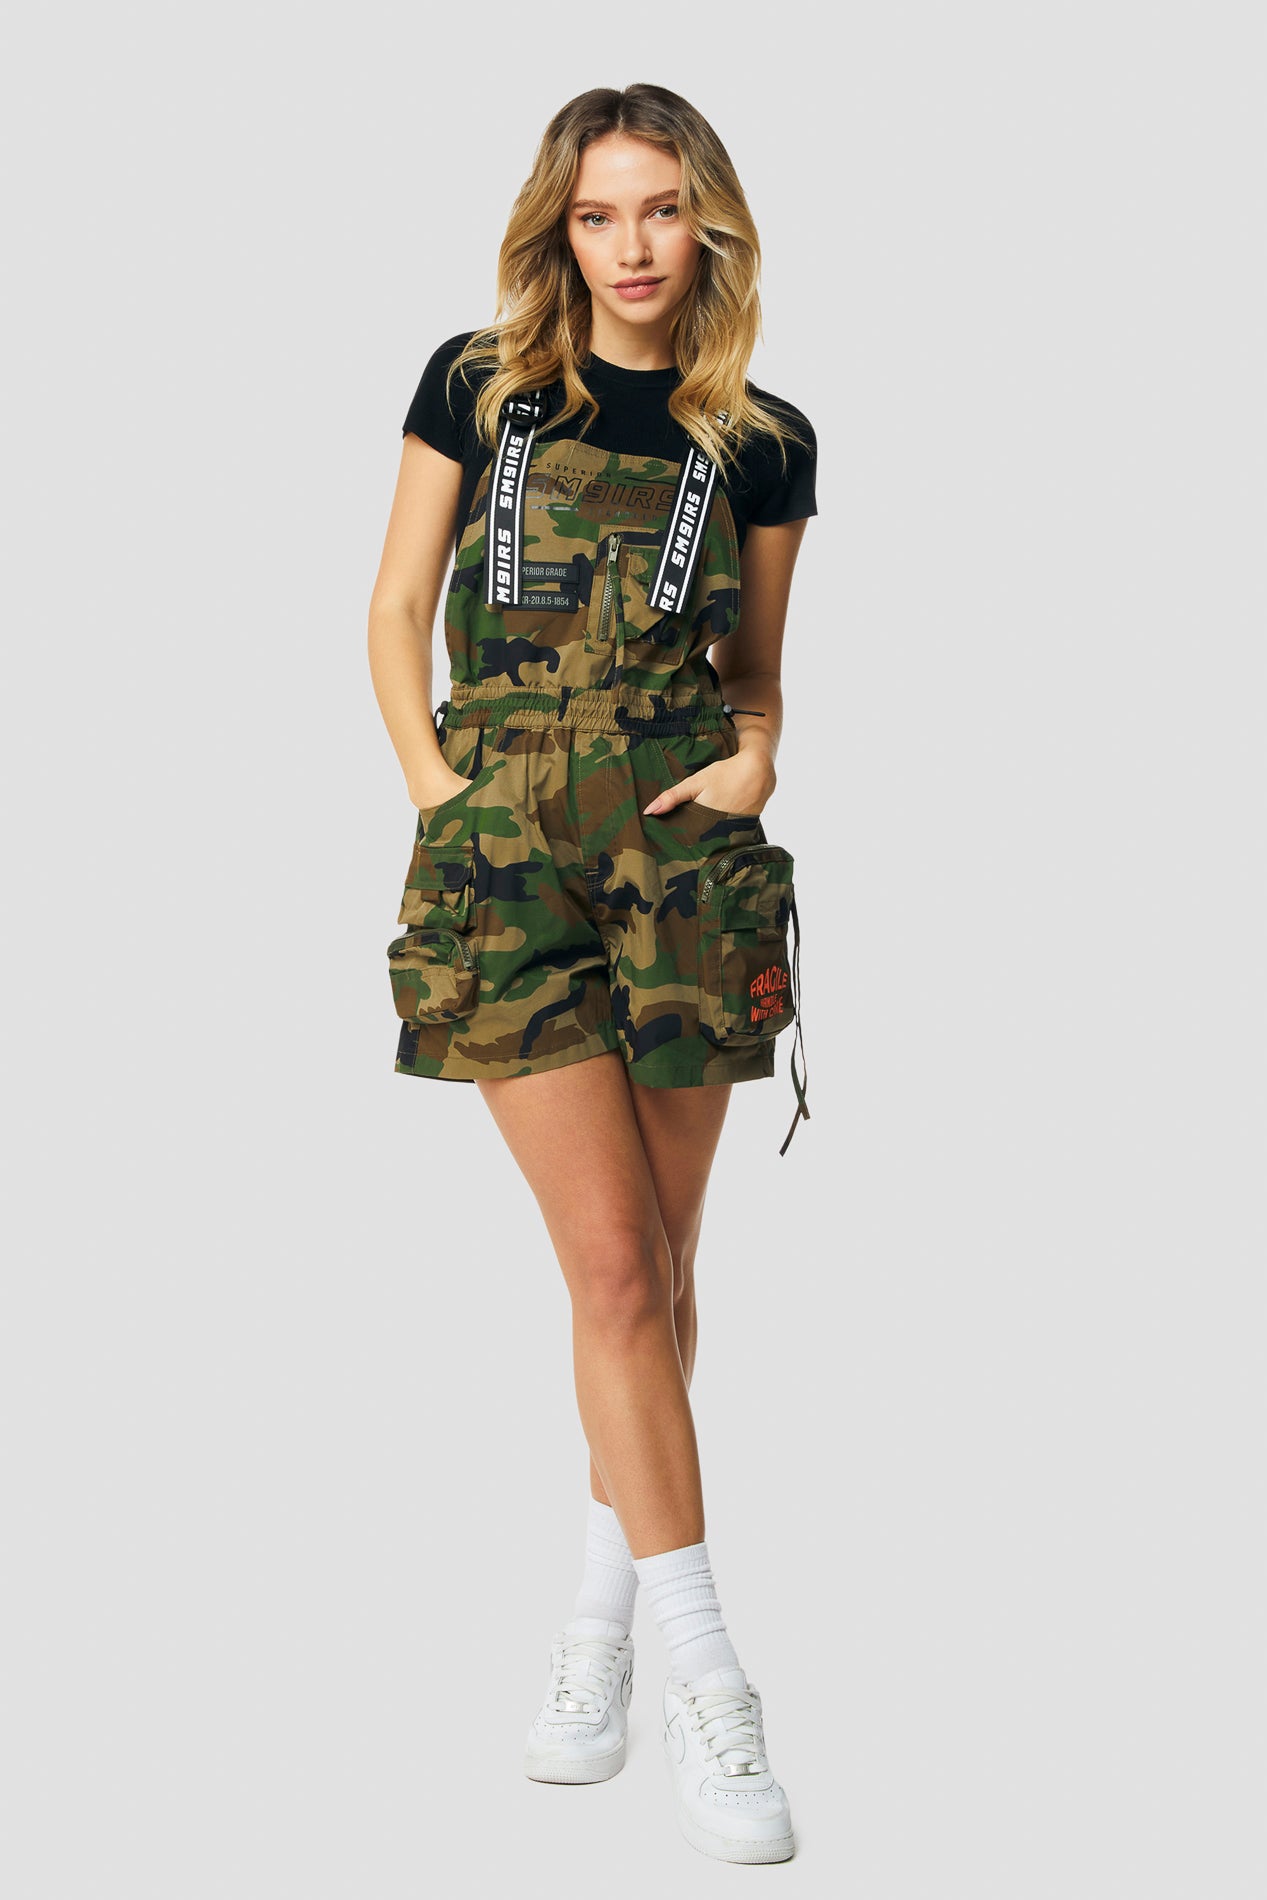 Wood Camo Regular fit utility overall shorts